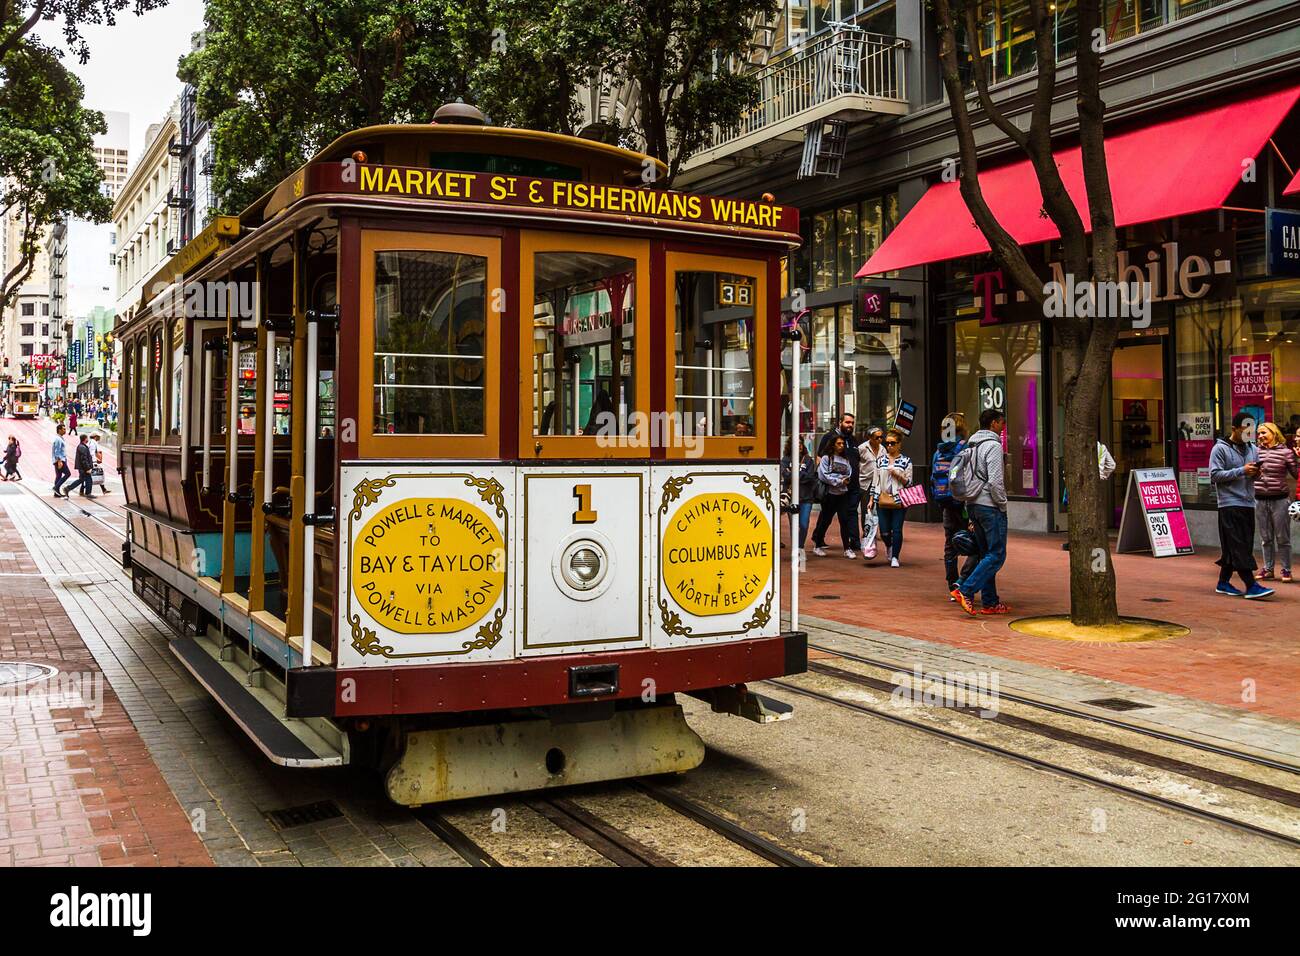 Close up of the Market Street - Fisherman's Wharf cable car in San Francisco Stock Photo